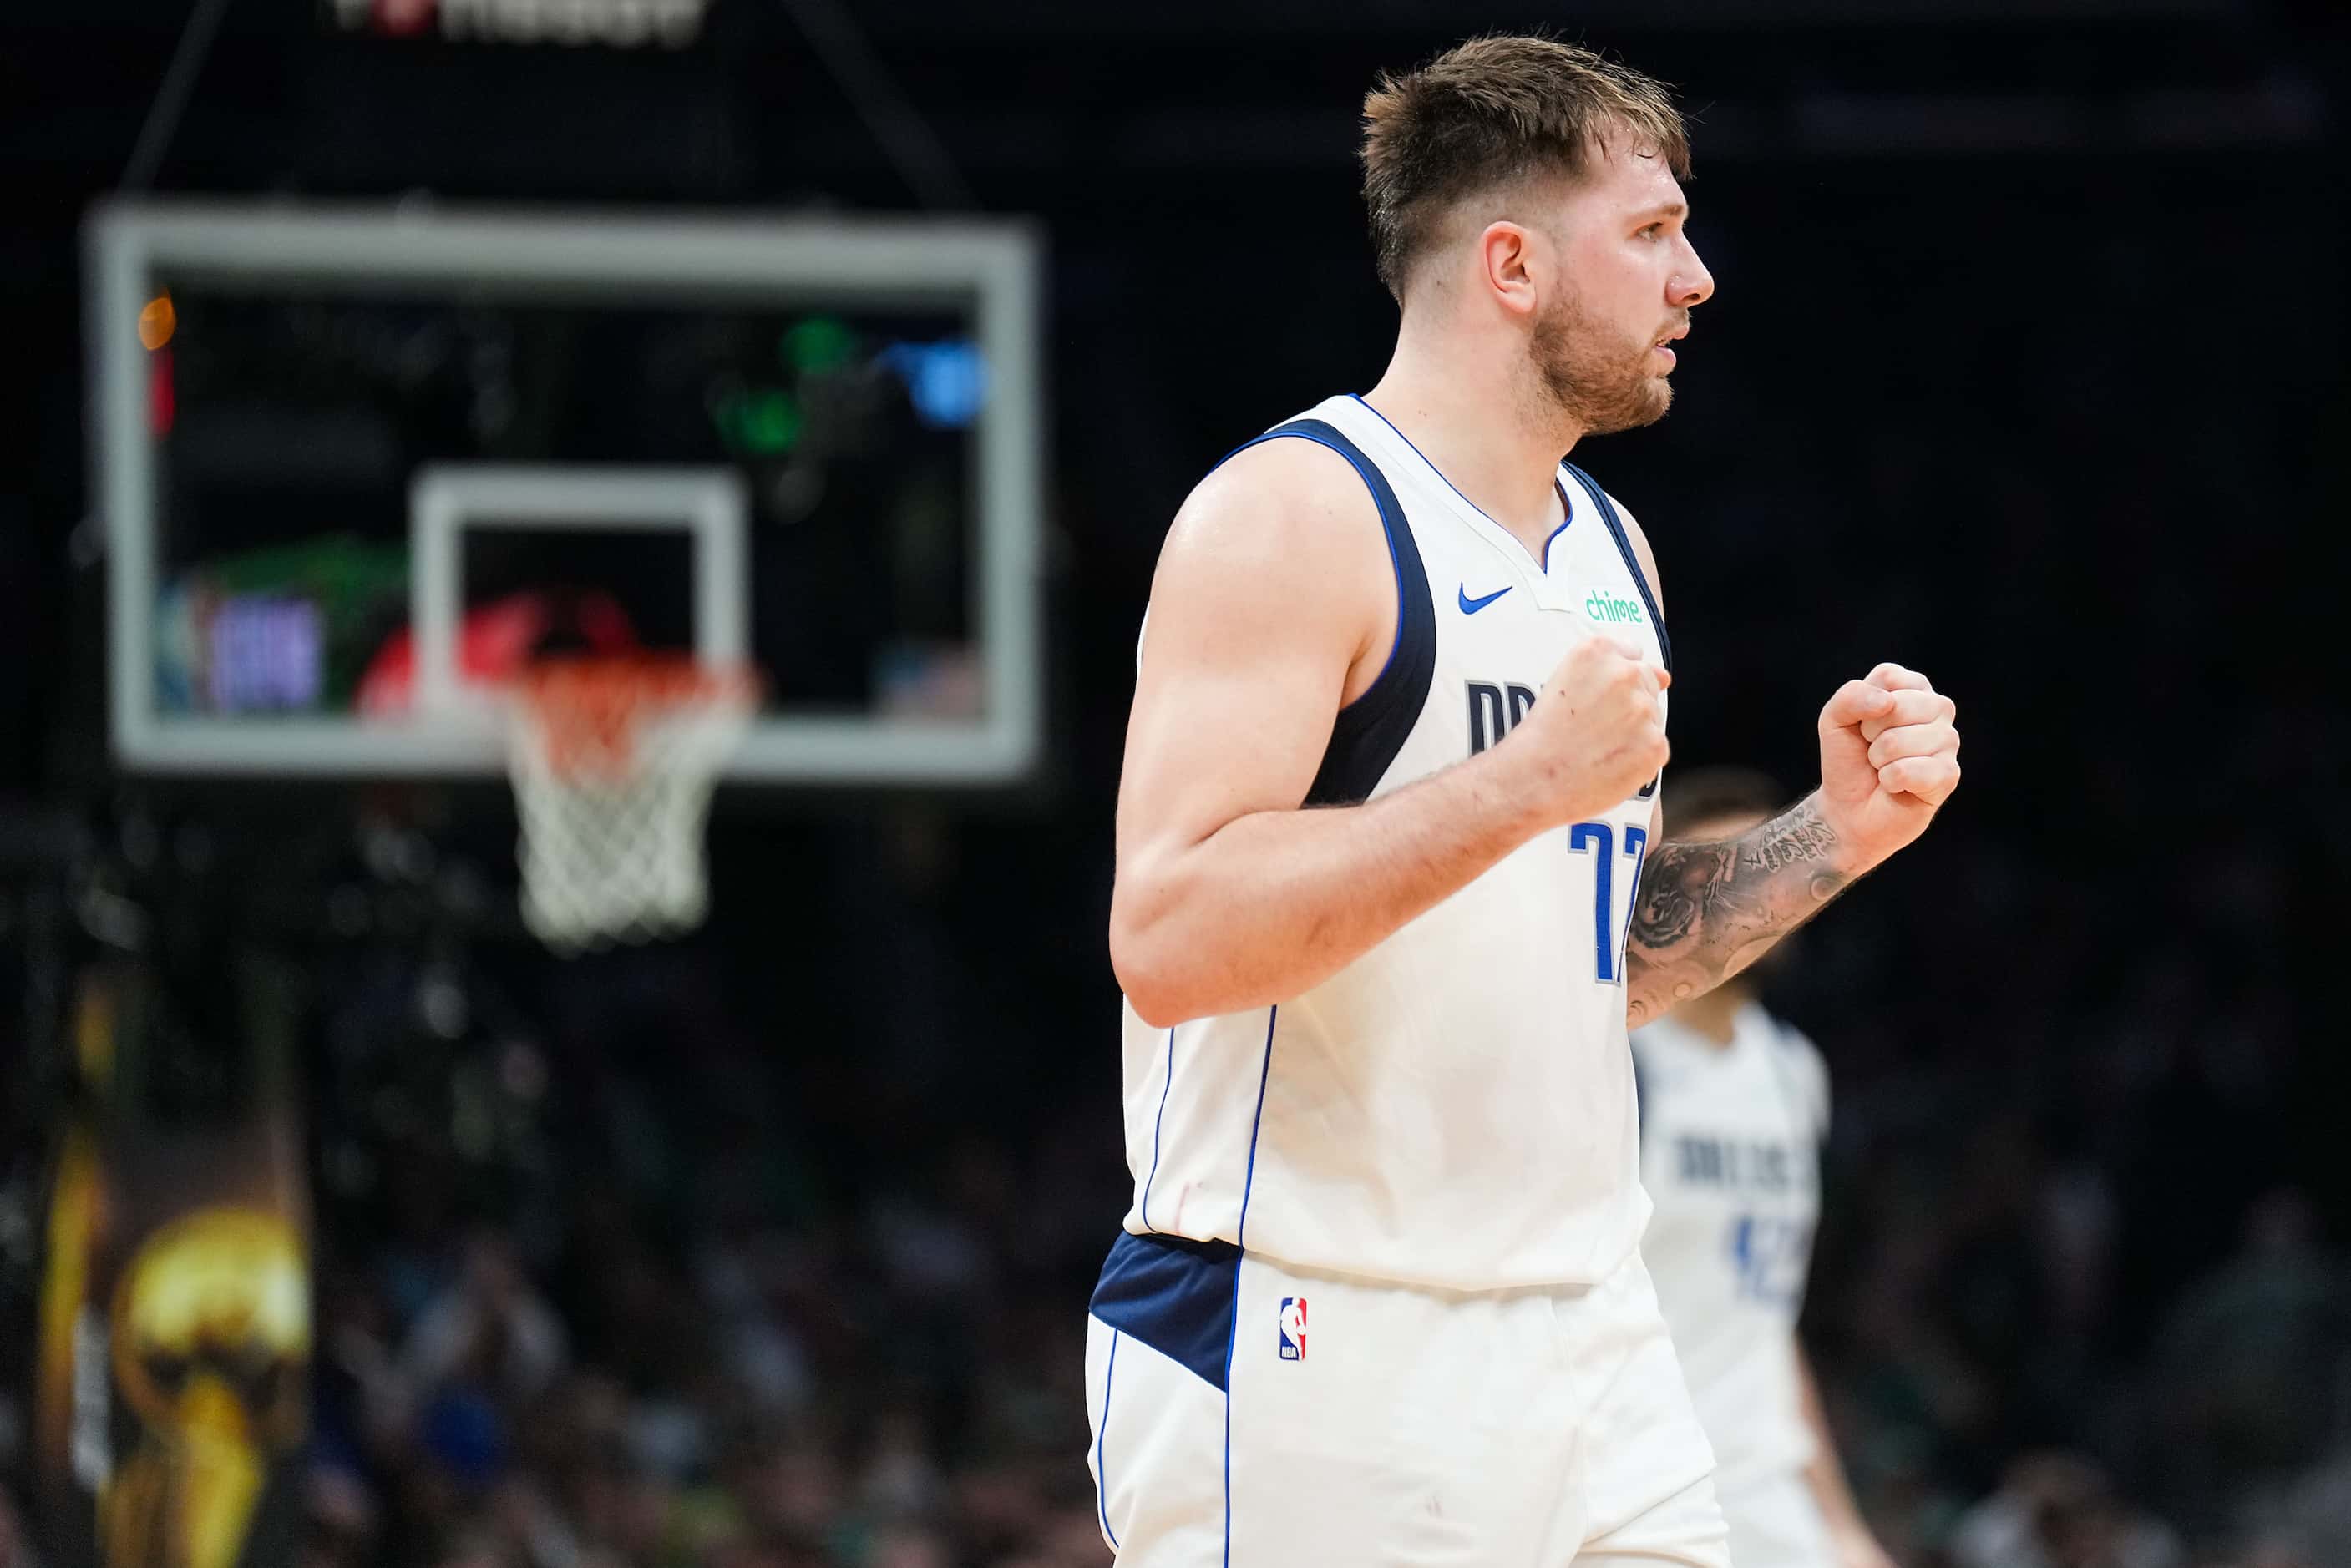 Dallas Mavericks guard Luka Doncic celebrates after a basket during the first half in Game 2...